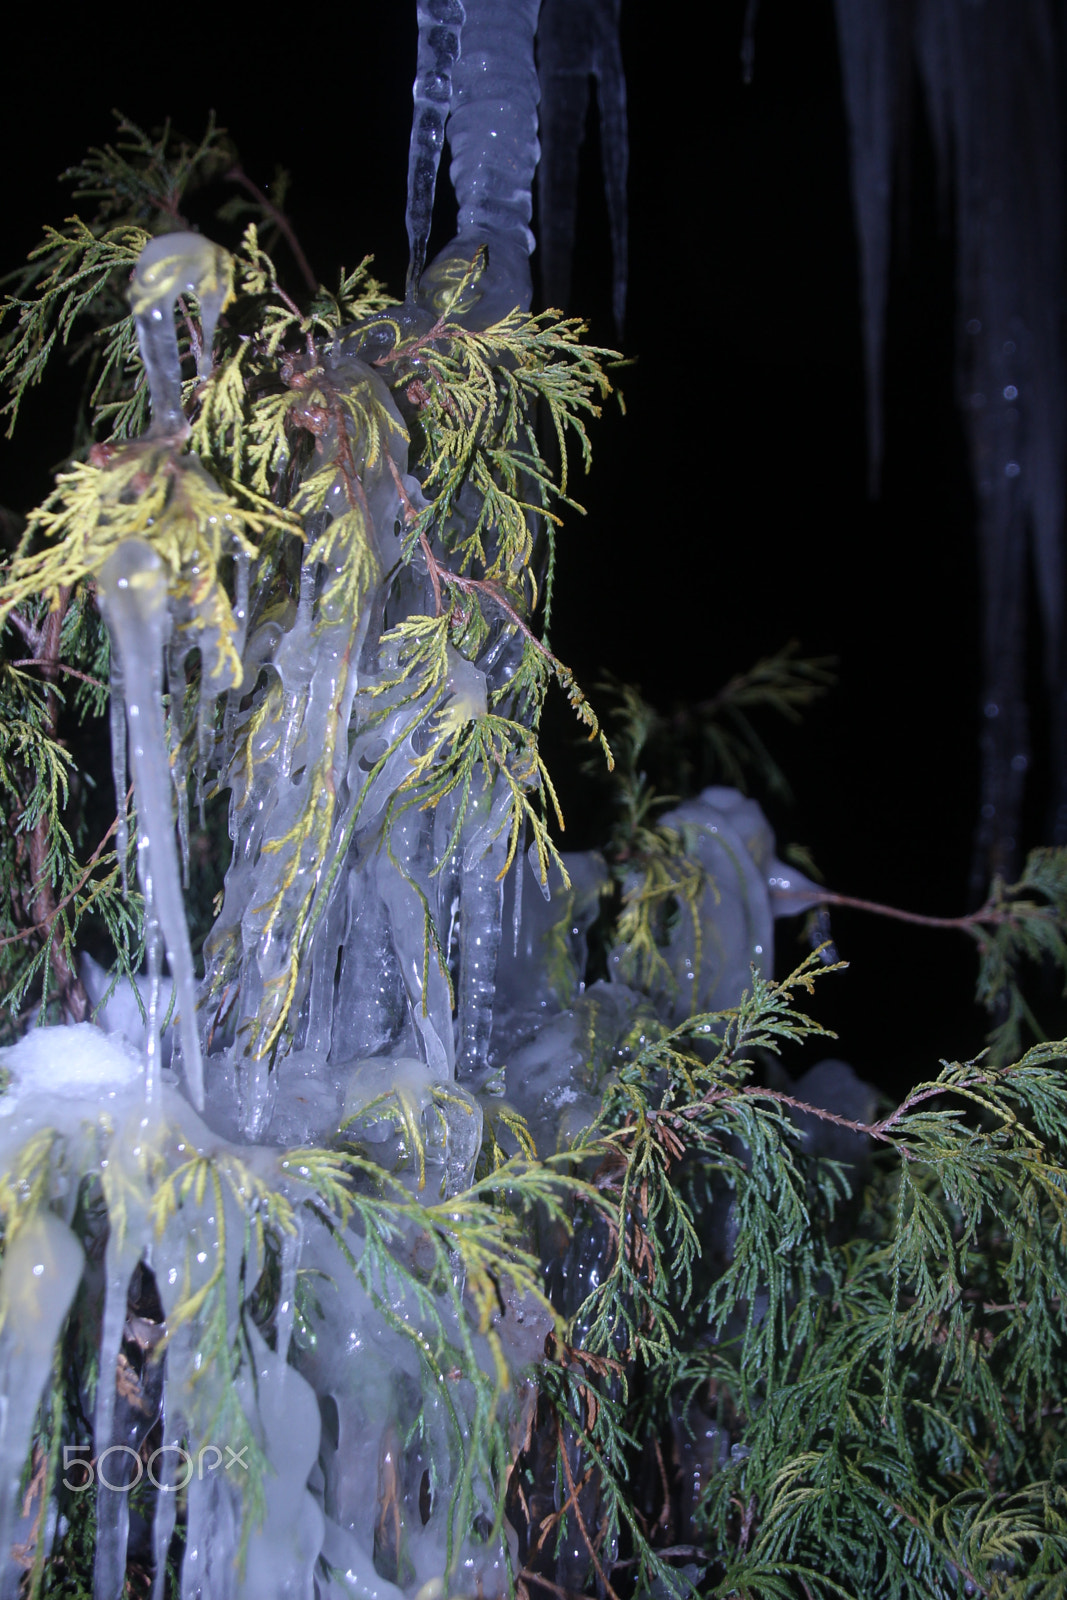 Canon EOS 1200D (EOS Rebel T5 / EOS Kiss X70 / EOS Hi) + Tamron 18-270mm F3.5-6.3 Di II VC PZD sample photo. Plant covered in icicles at night. 在冰柱覆蓋的植物在晚上。 photography